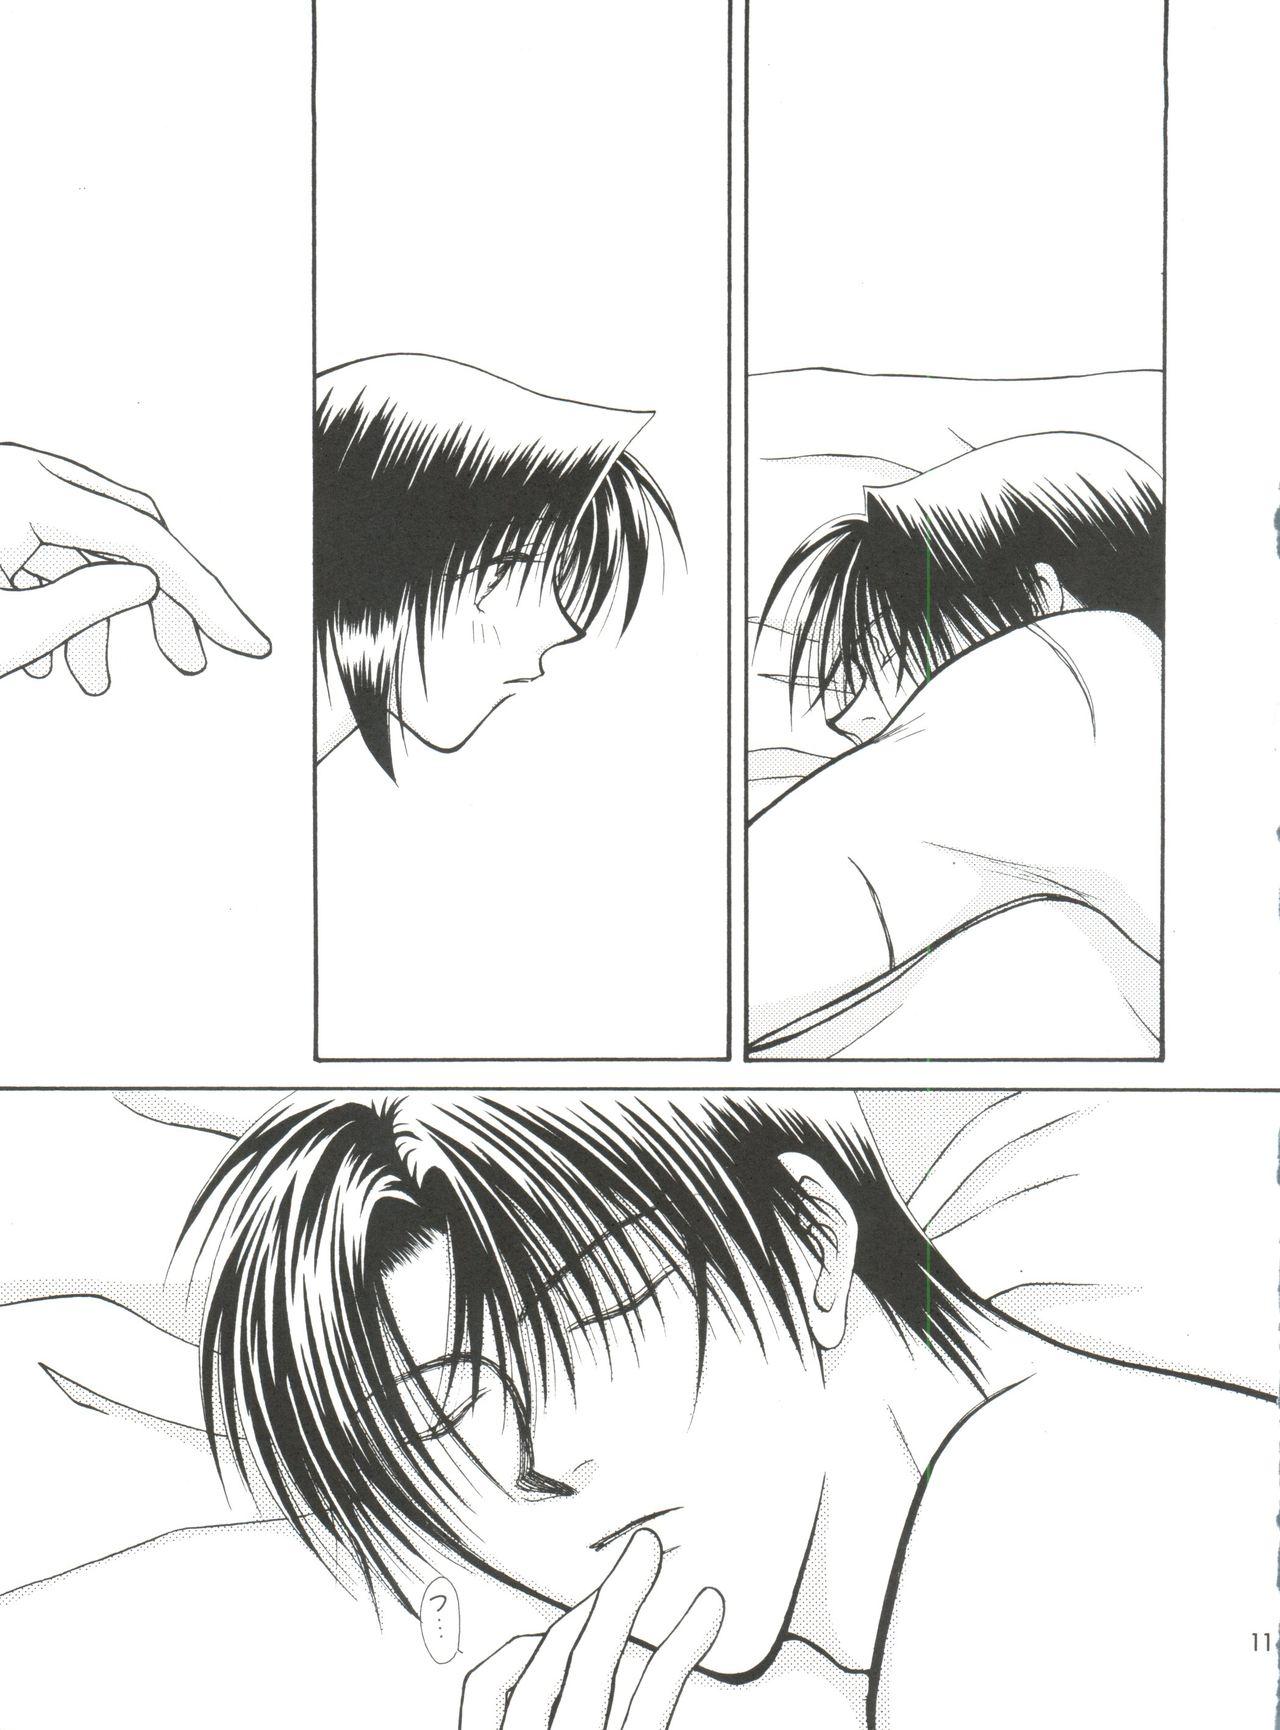 Ejaculation replay - Rurouni kenshin Exposed - Page 2